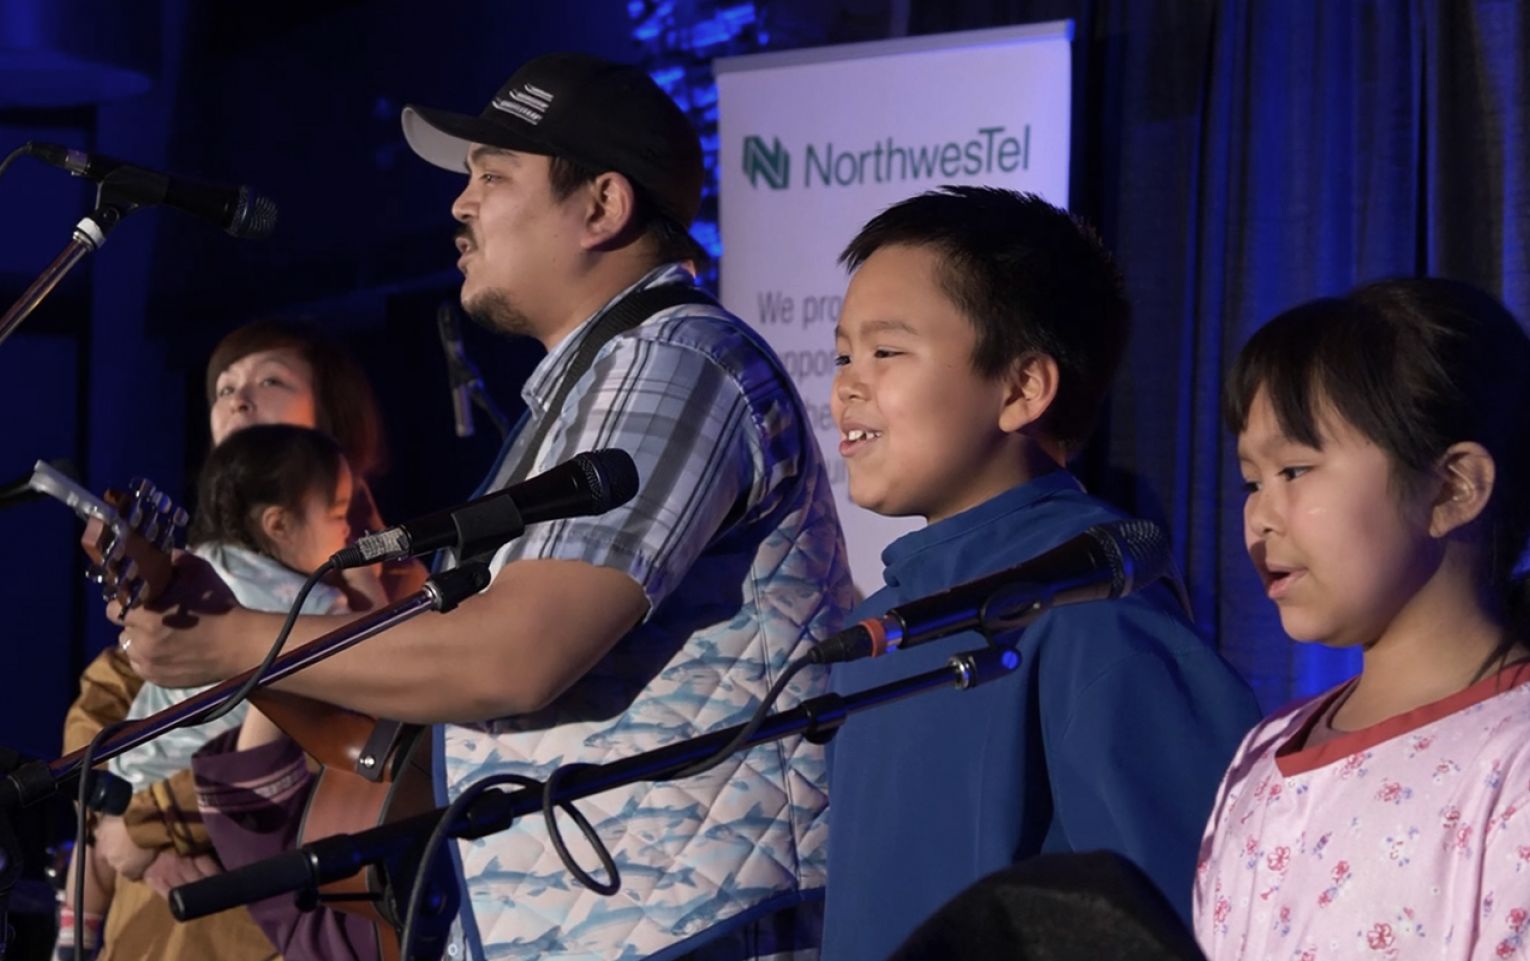 Indigenous singing performance with children singing in choir